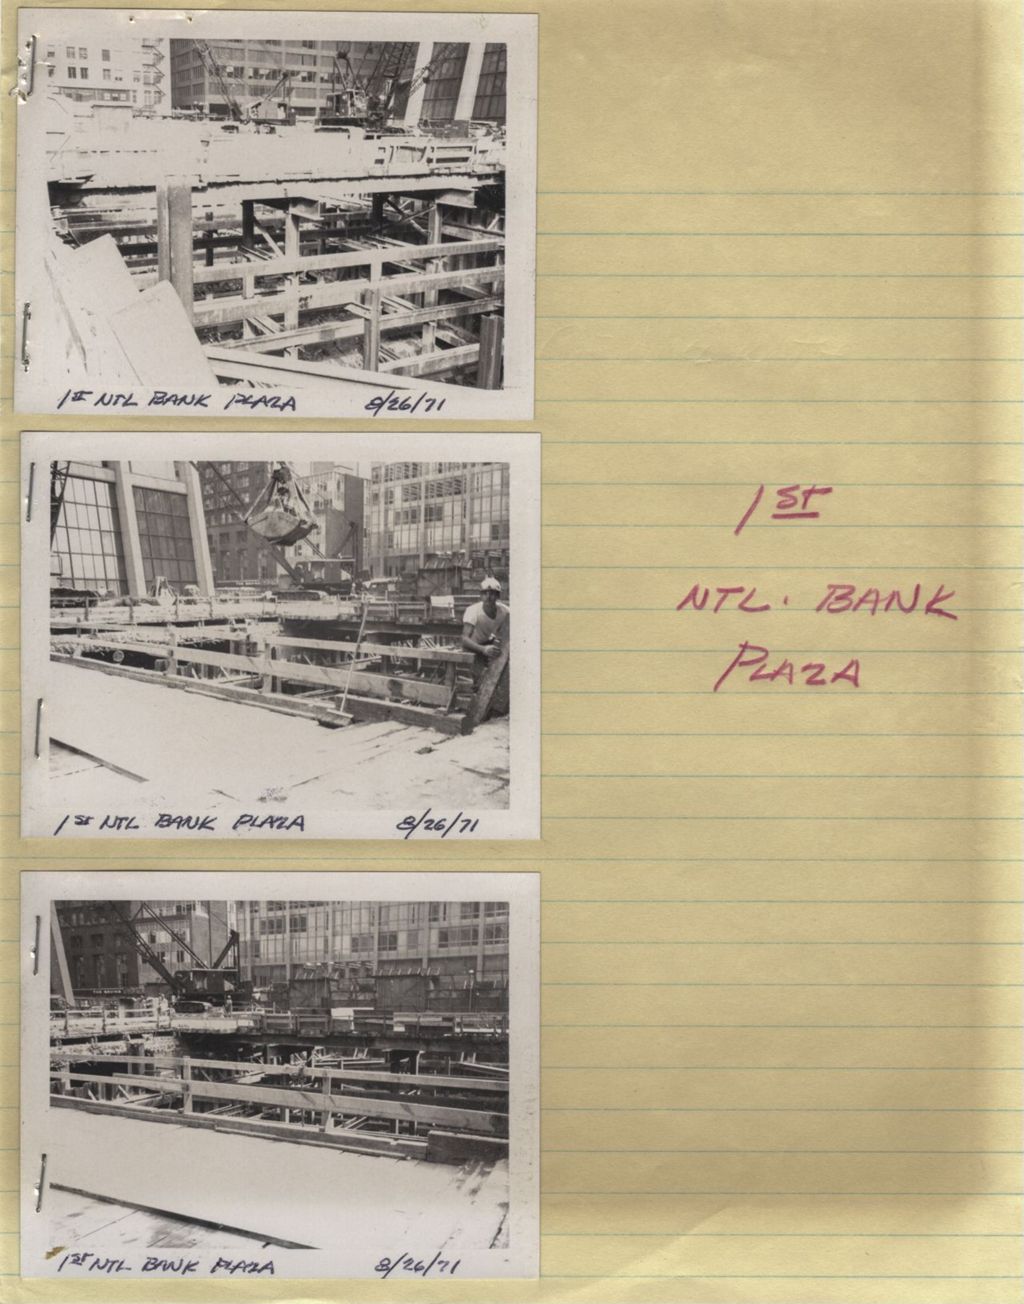 Construction of the First National Bank Plaza